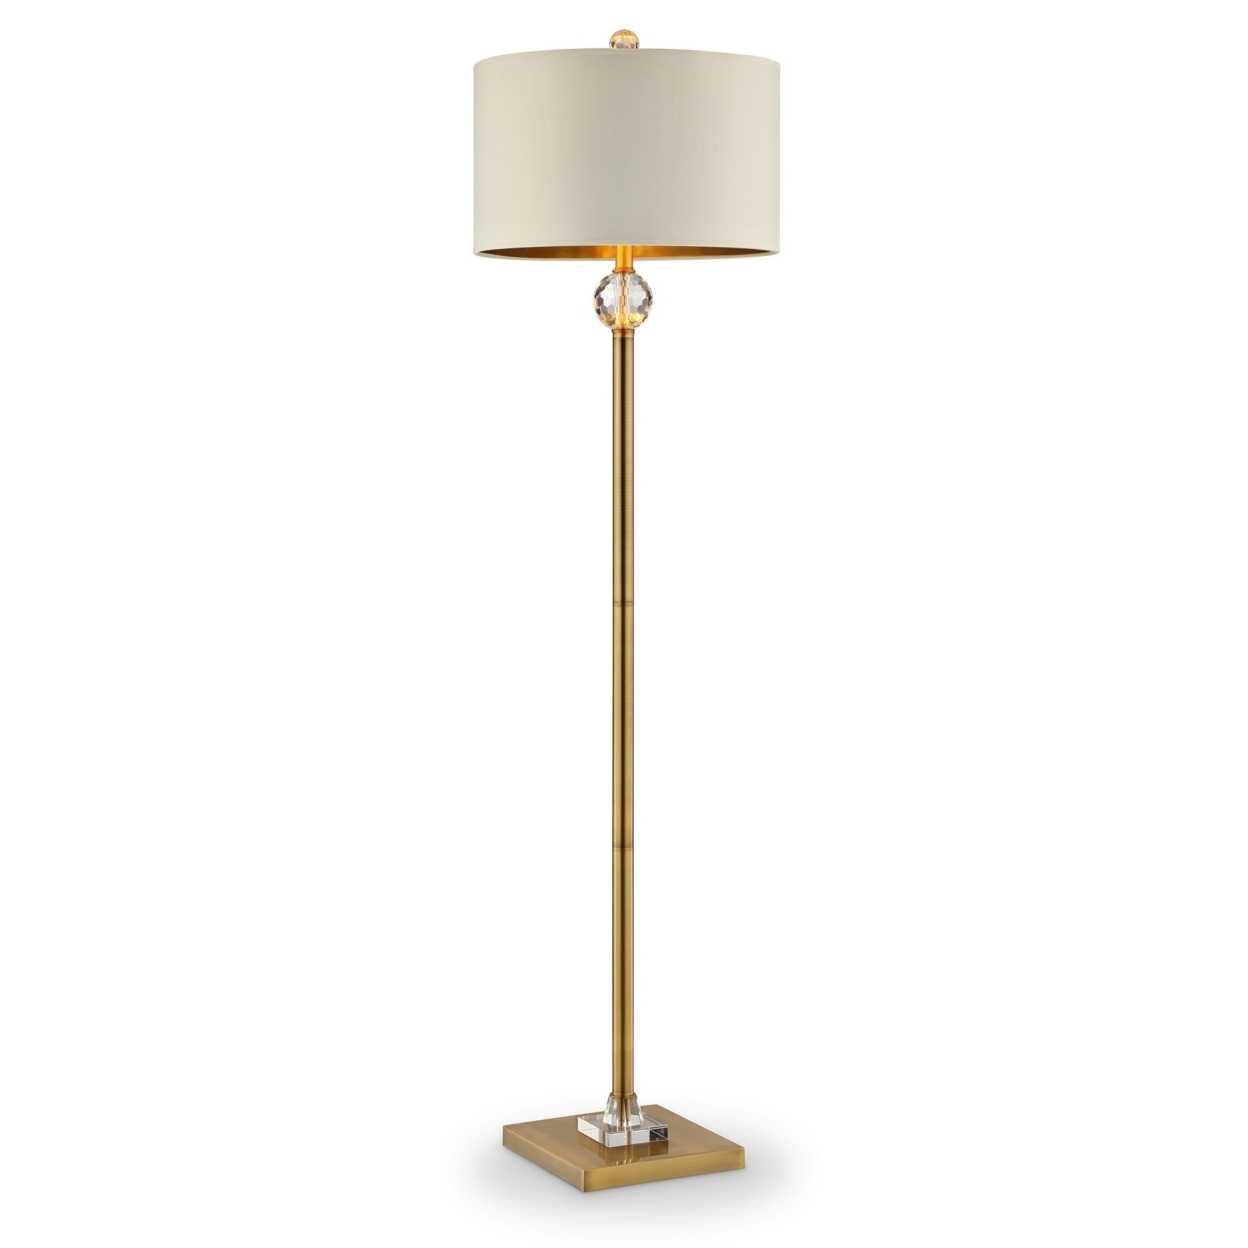 Floor Lamp With Crystal Orb And Metal Stalk Support, Gold- Saltoro Sherpi